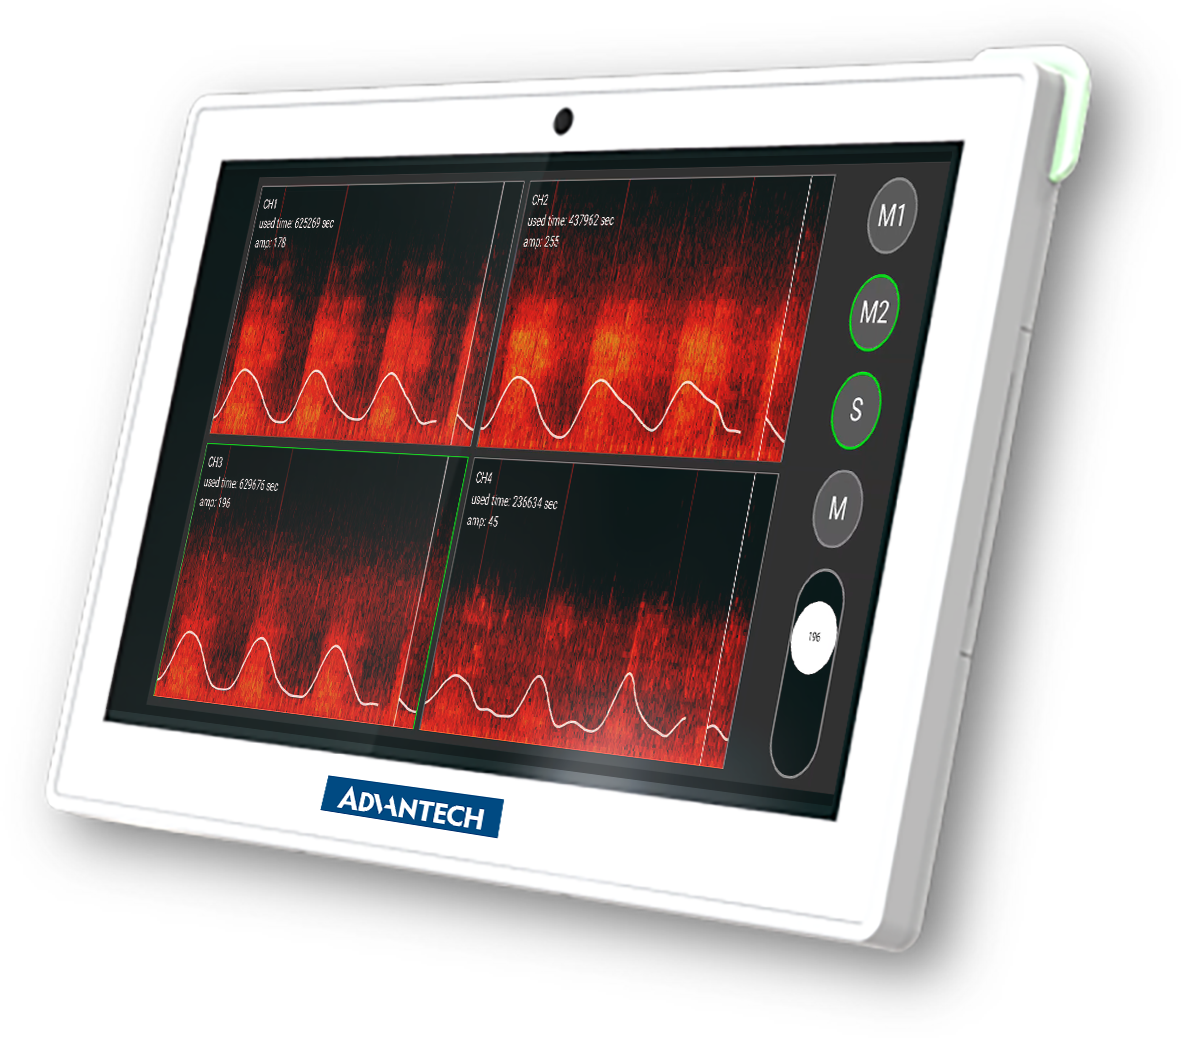 Advantech HIT-512 Patient Monitor: capable of Multi-channel continuous respiratory monitoring using AI.